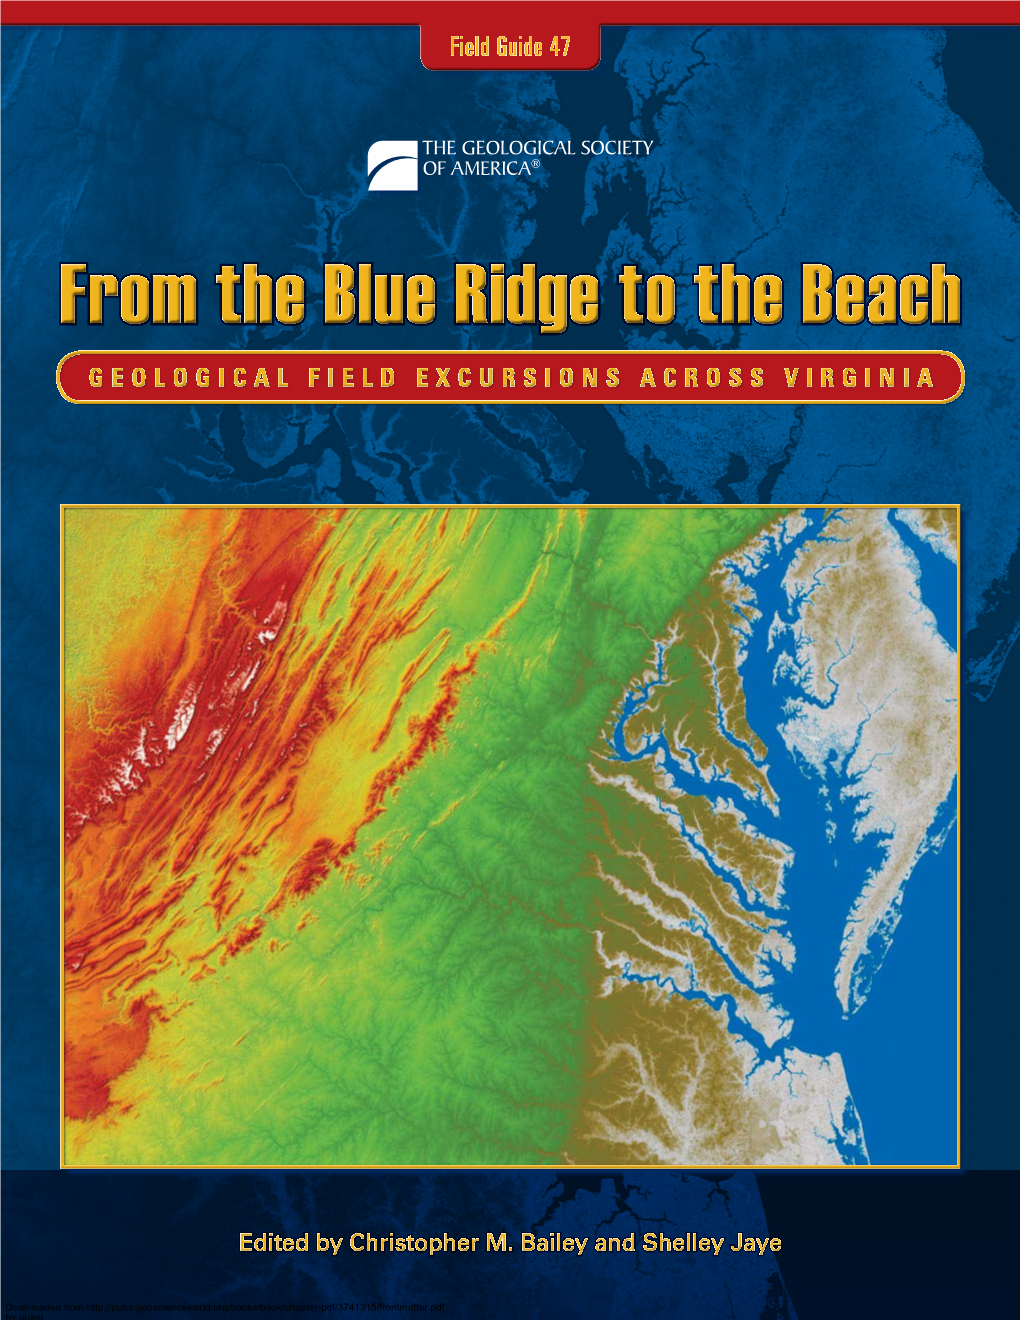 From the Blue Ridge to the Beach: Geological Field Excursions Across Virginia from the Blue Ridge to the Beach: Geological Field Excursions Across Virginia